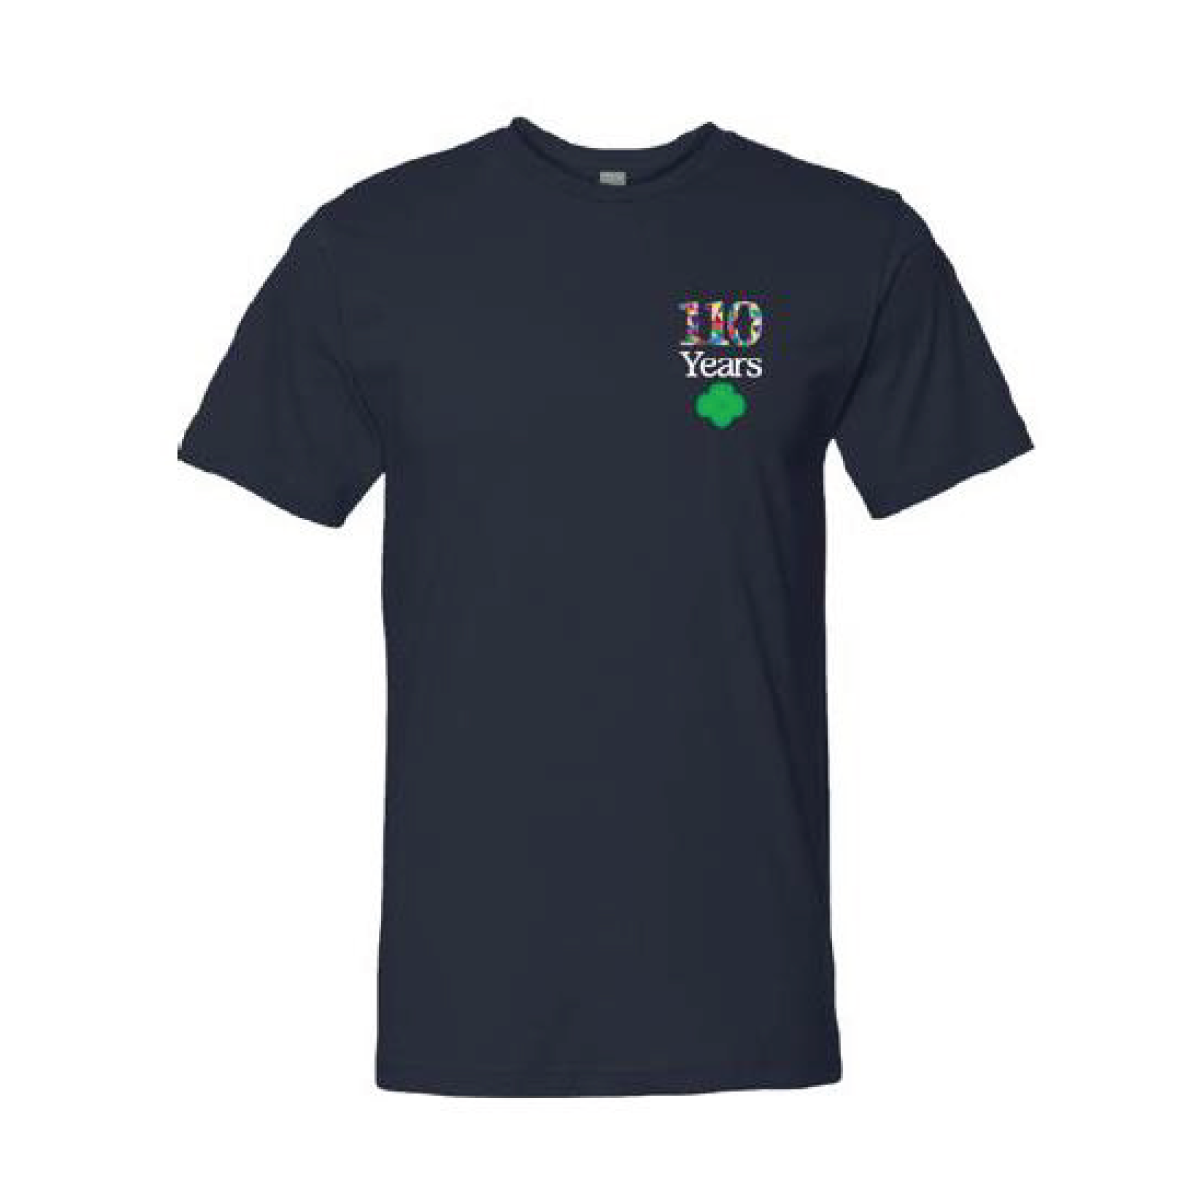 110 Years Adult T-Shirt 